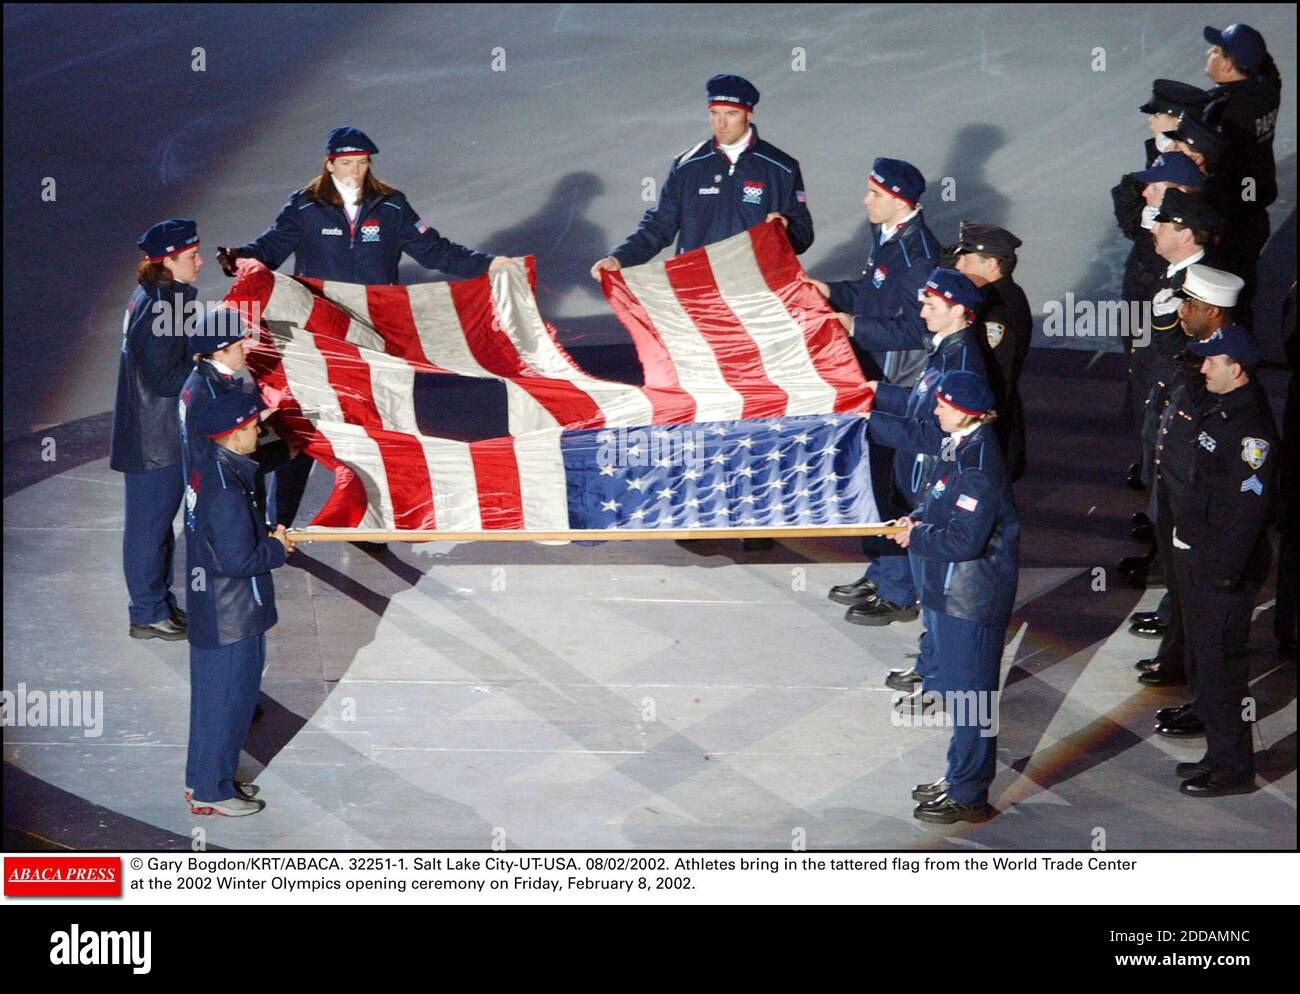 NO FILM, NO VIDEO, NO TV, NO DOCUMENTARY - © Gary Bogdon/KRT/ABACA. 32251-1. Salt Lake City-UT-USA. 08/02/2002. Athletes bring in the tattered flag from the World Trade Center at the 2002 Winter Olympics opening ceremony on Friday, February 8, 2002. Stock Photo